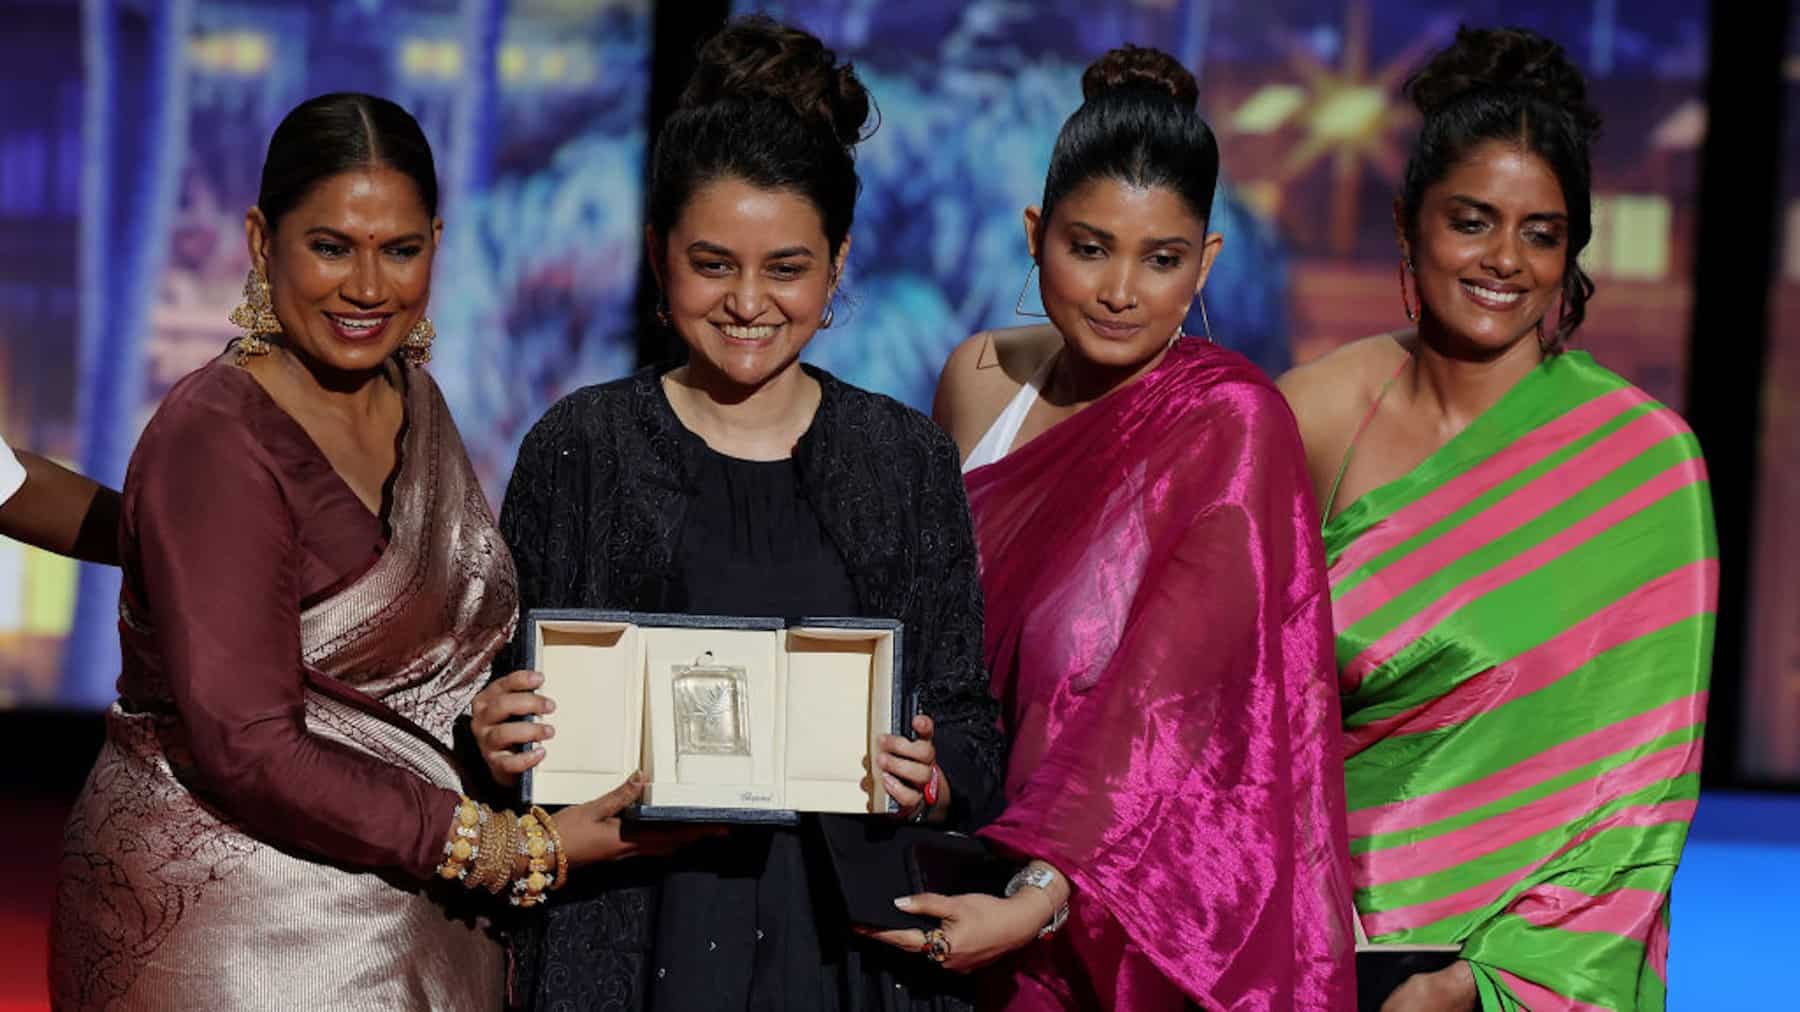 Payal Kapadia after winning Grand Prix: Long live Indian Cinema with all its differences